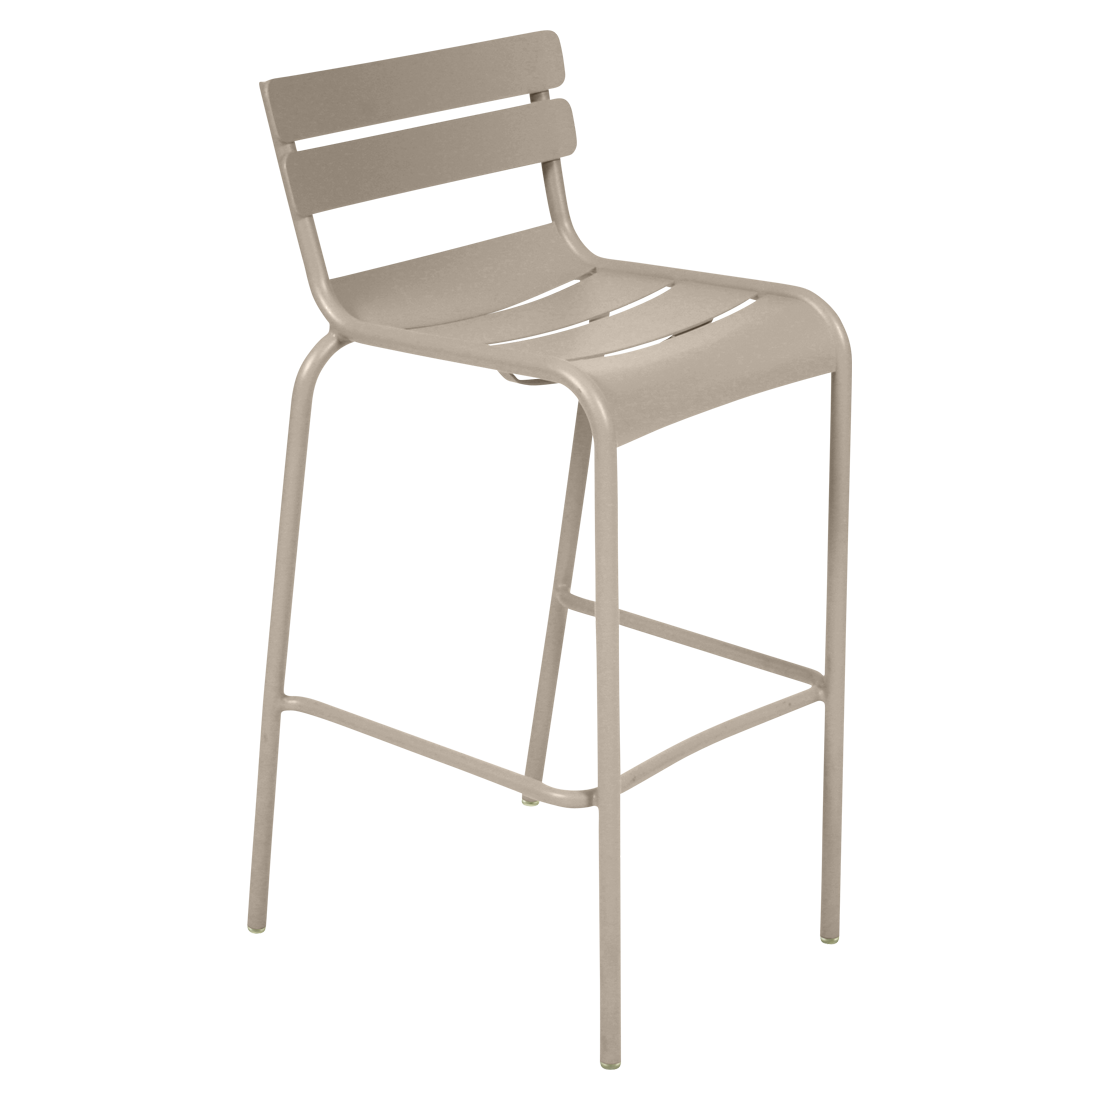 FERMOB Luxembourg High Stool - [Set of 4]